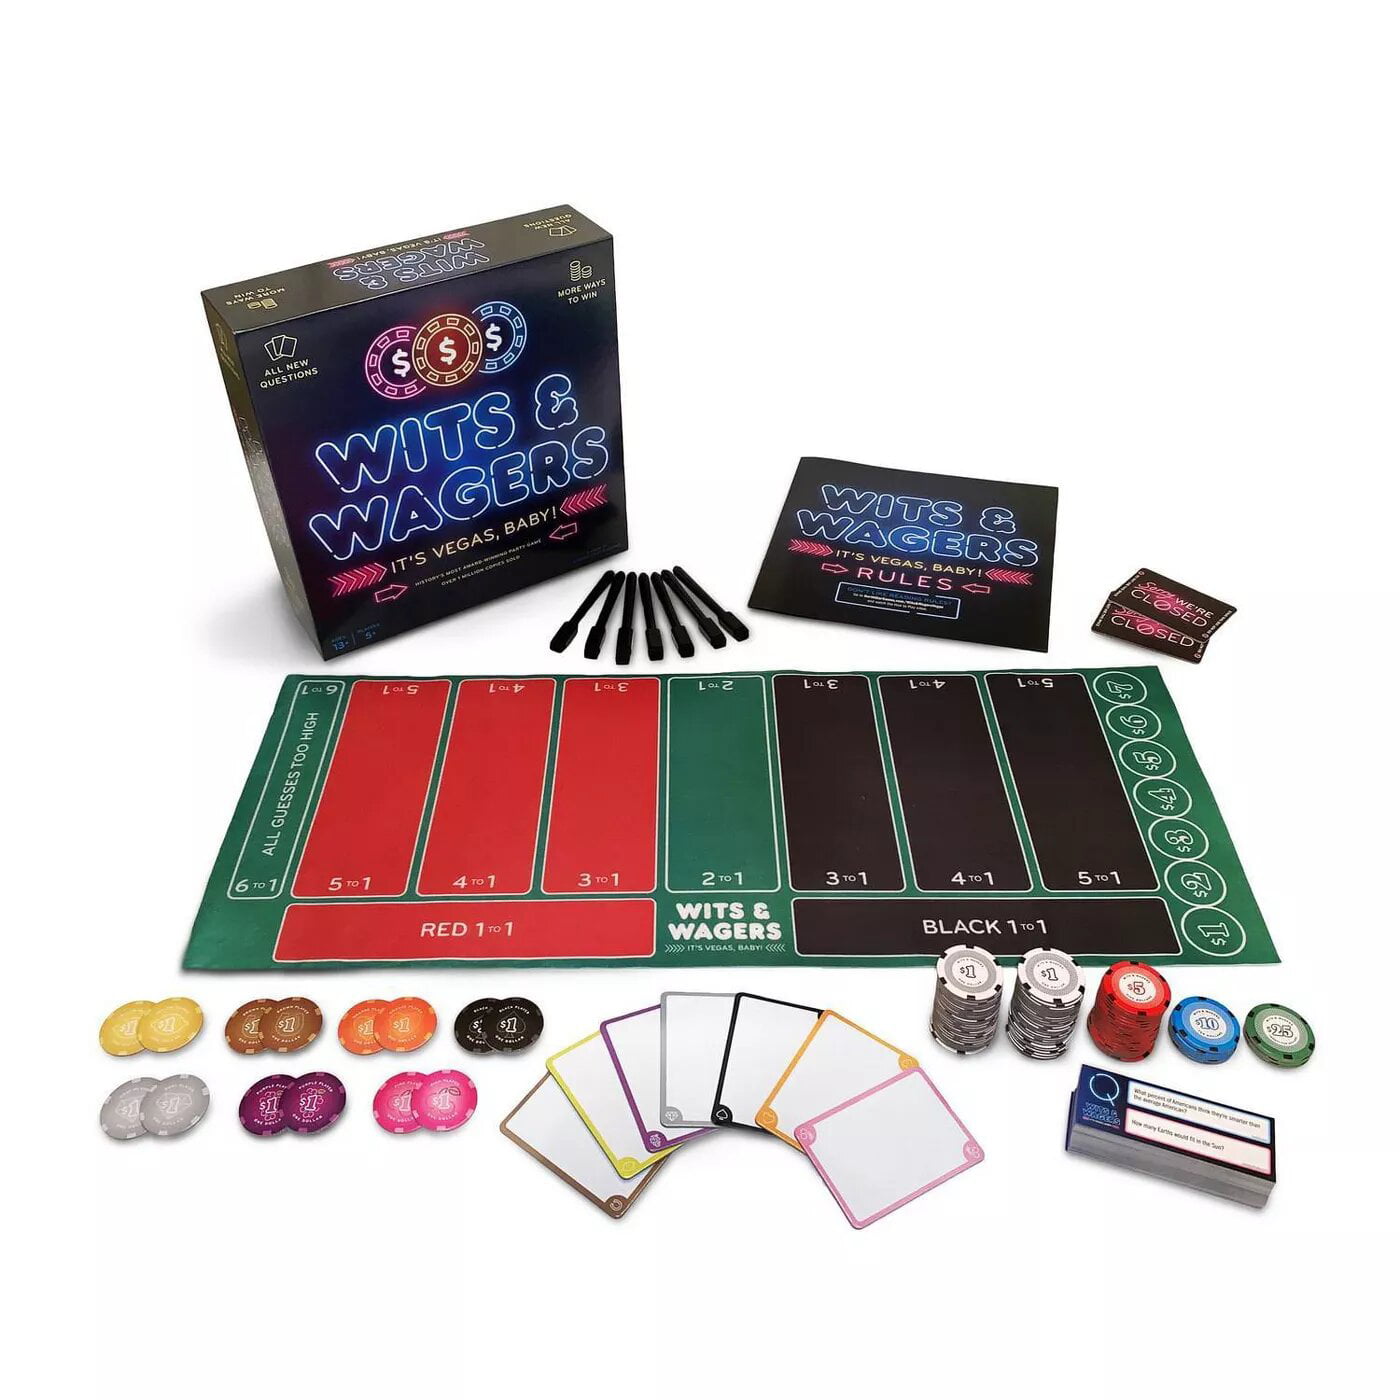 2013 North Star Games Wits & Wagers 39 Awards Party Game for 4 Players Ages 10 for sale online 